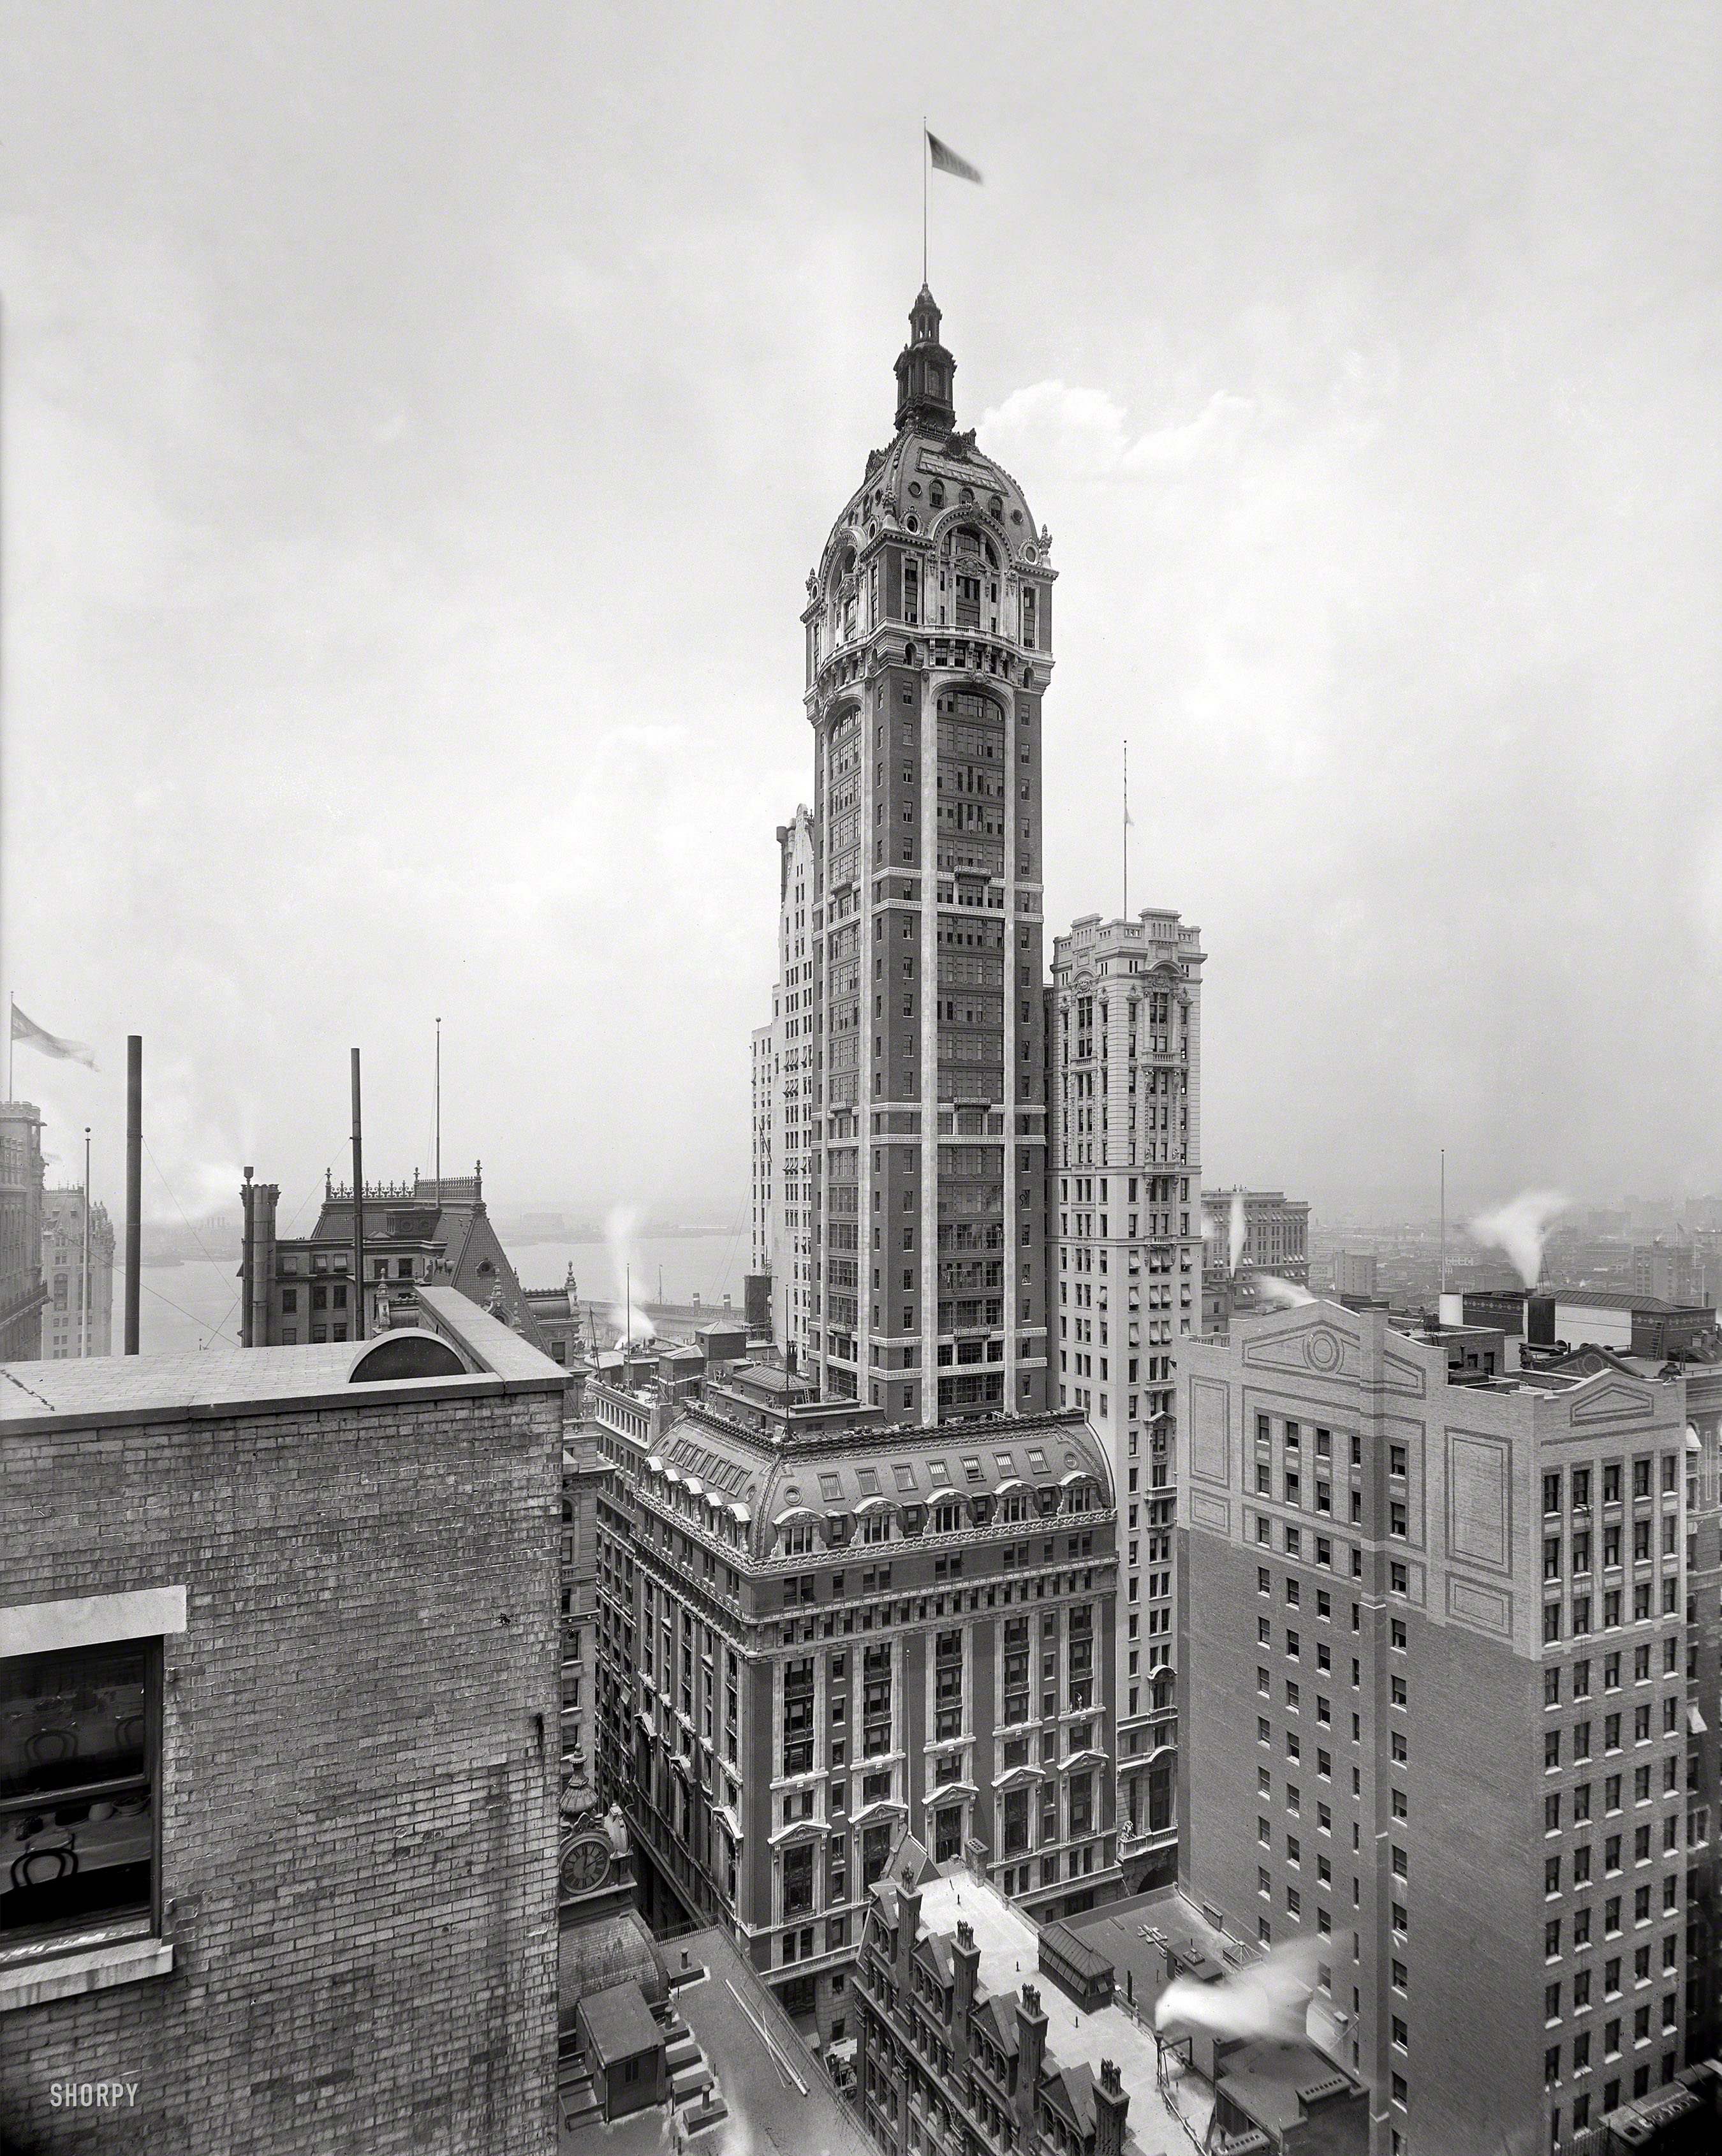 New York circa 1908. "The Singer Building." Shortly after its completion. 8x10 inch glass negative, Detroit Publishing Company. View full size.